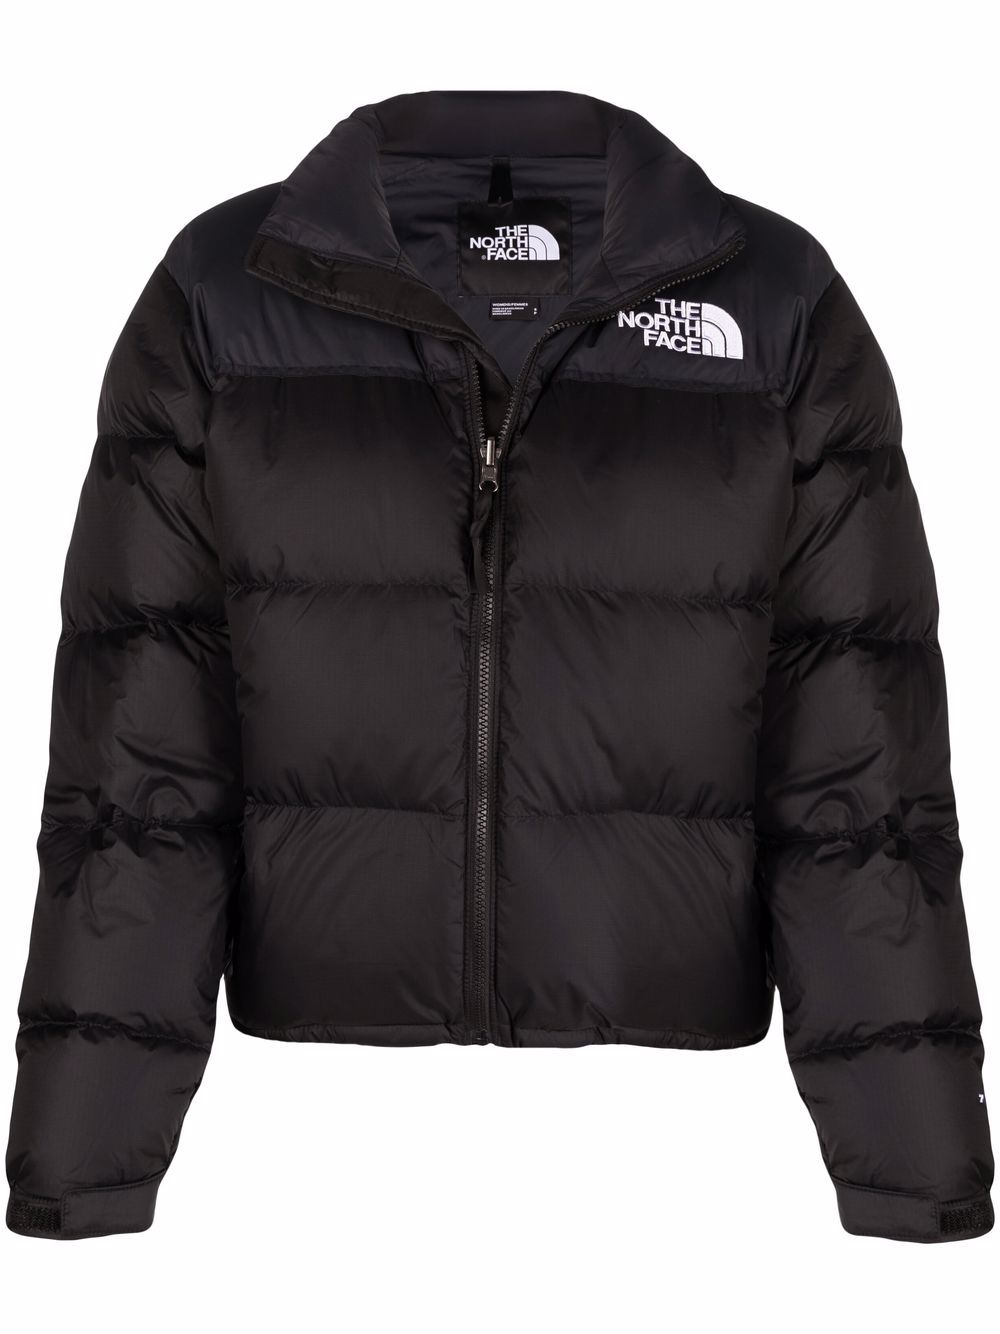 The North Face padded down jacket - Black von The North Face